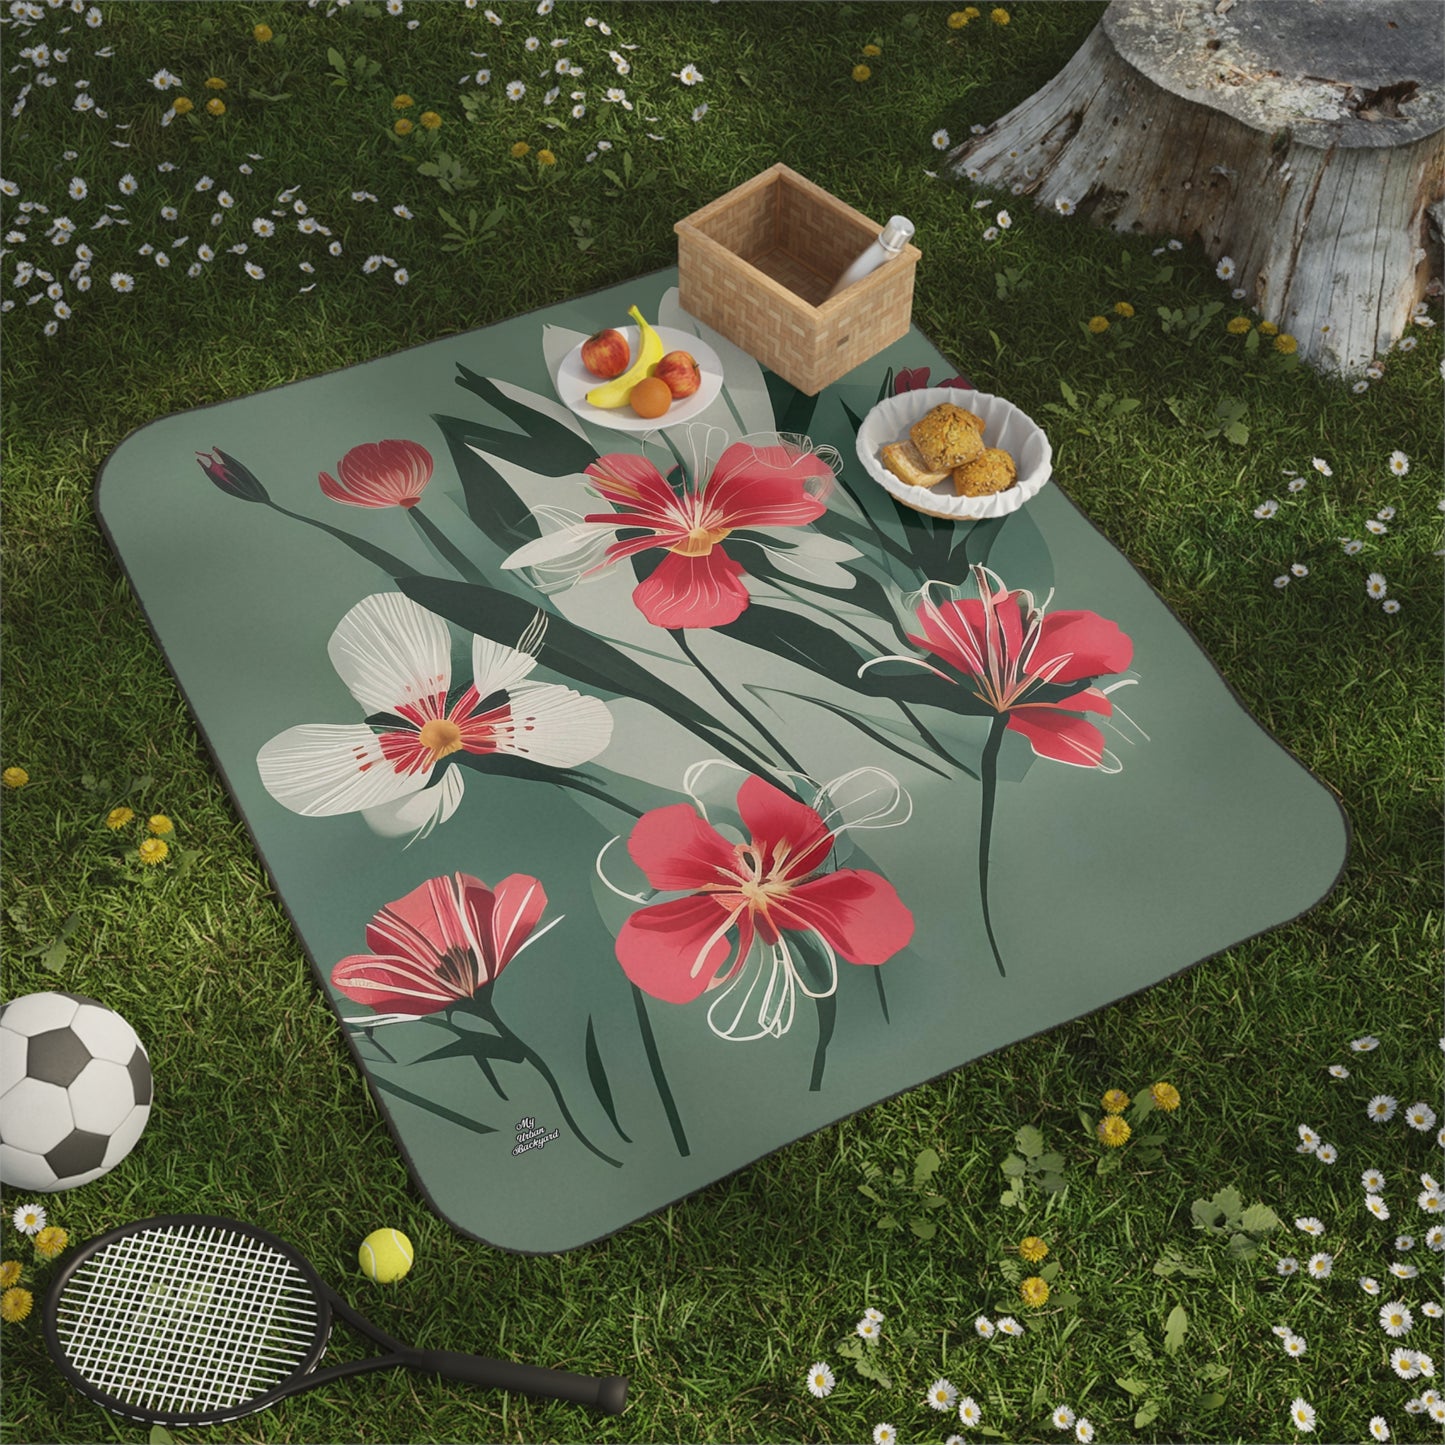 Outdoor Picnic Blanket with Soft Fleece Top and Water-Resistant Bottom - White and Red Wildflowers